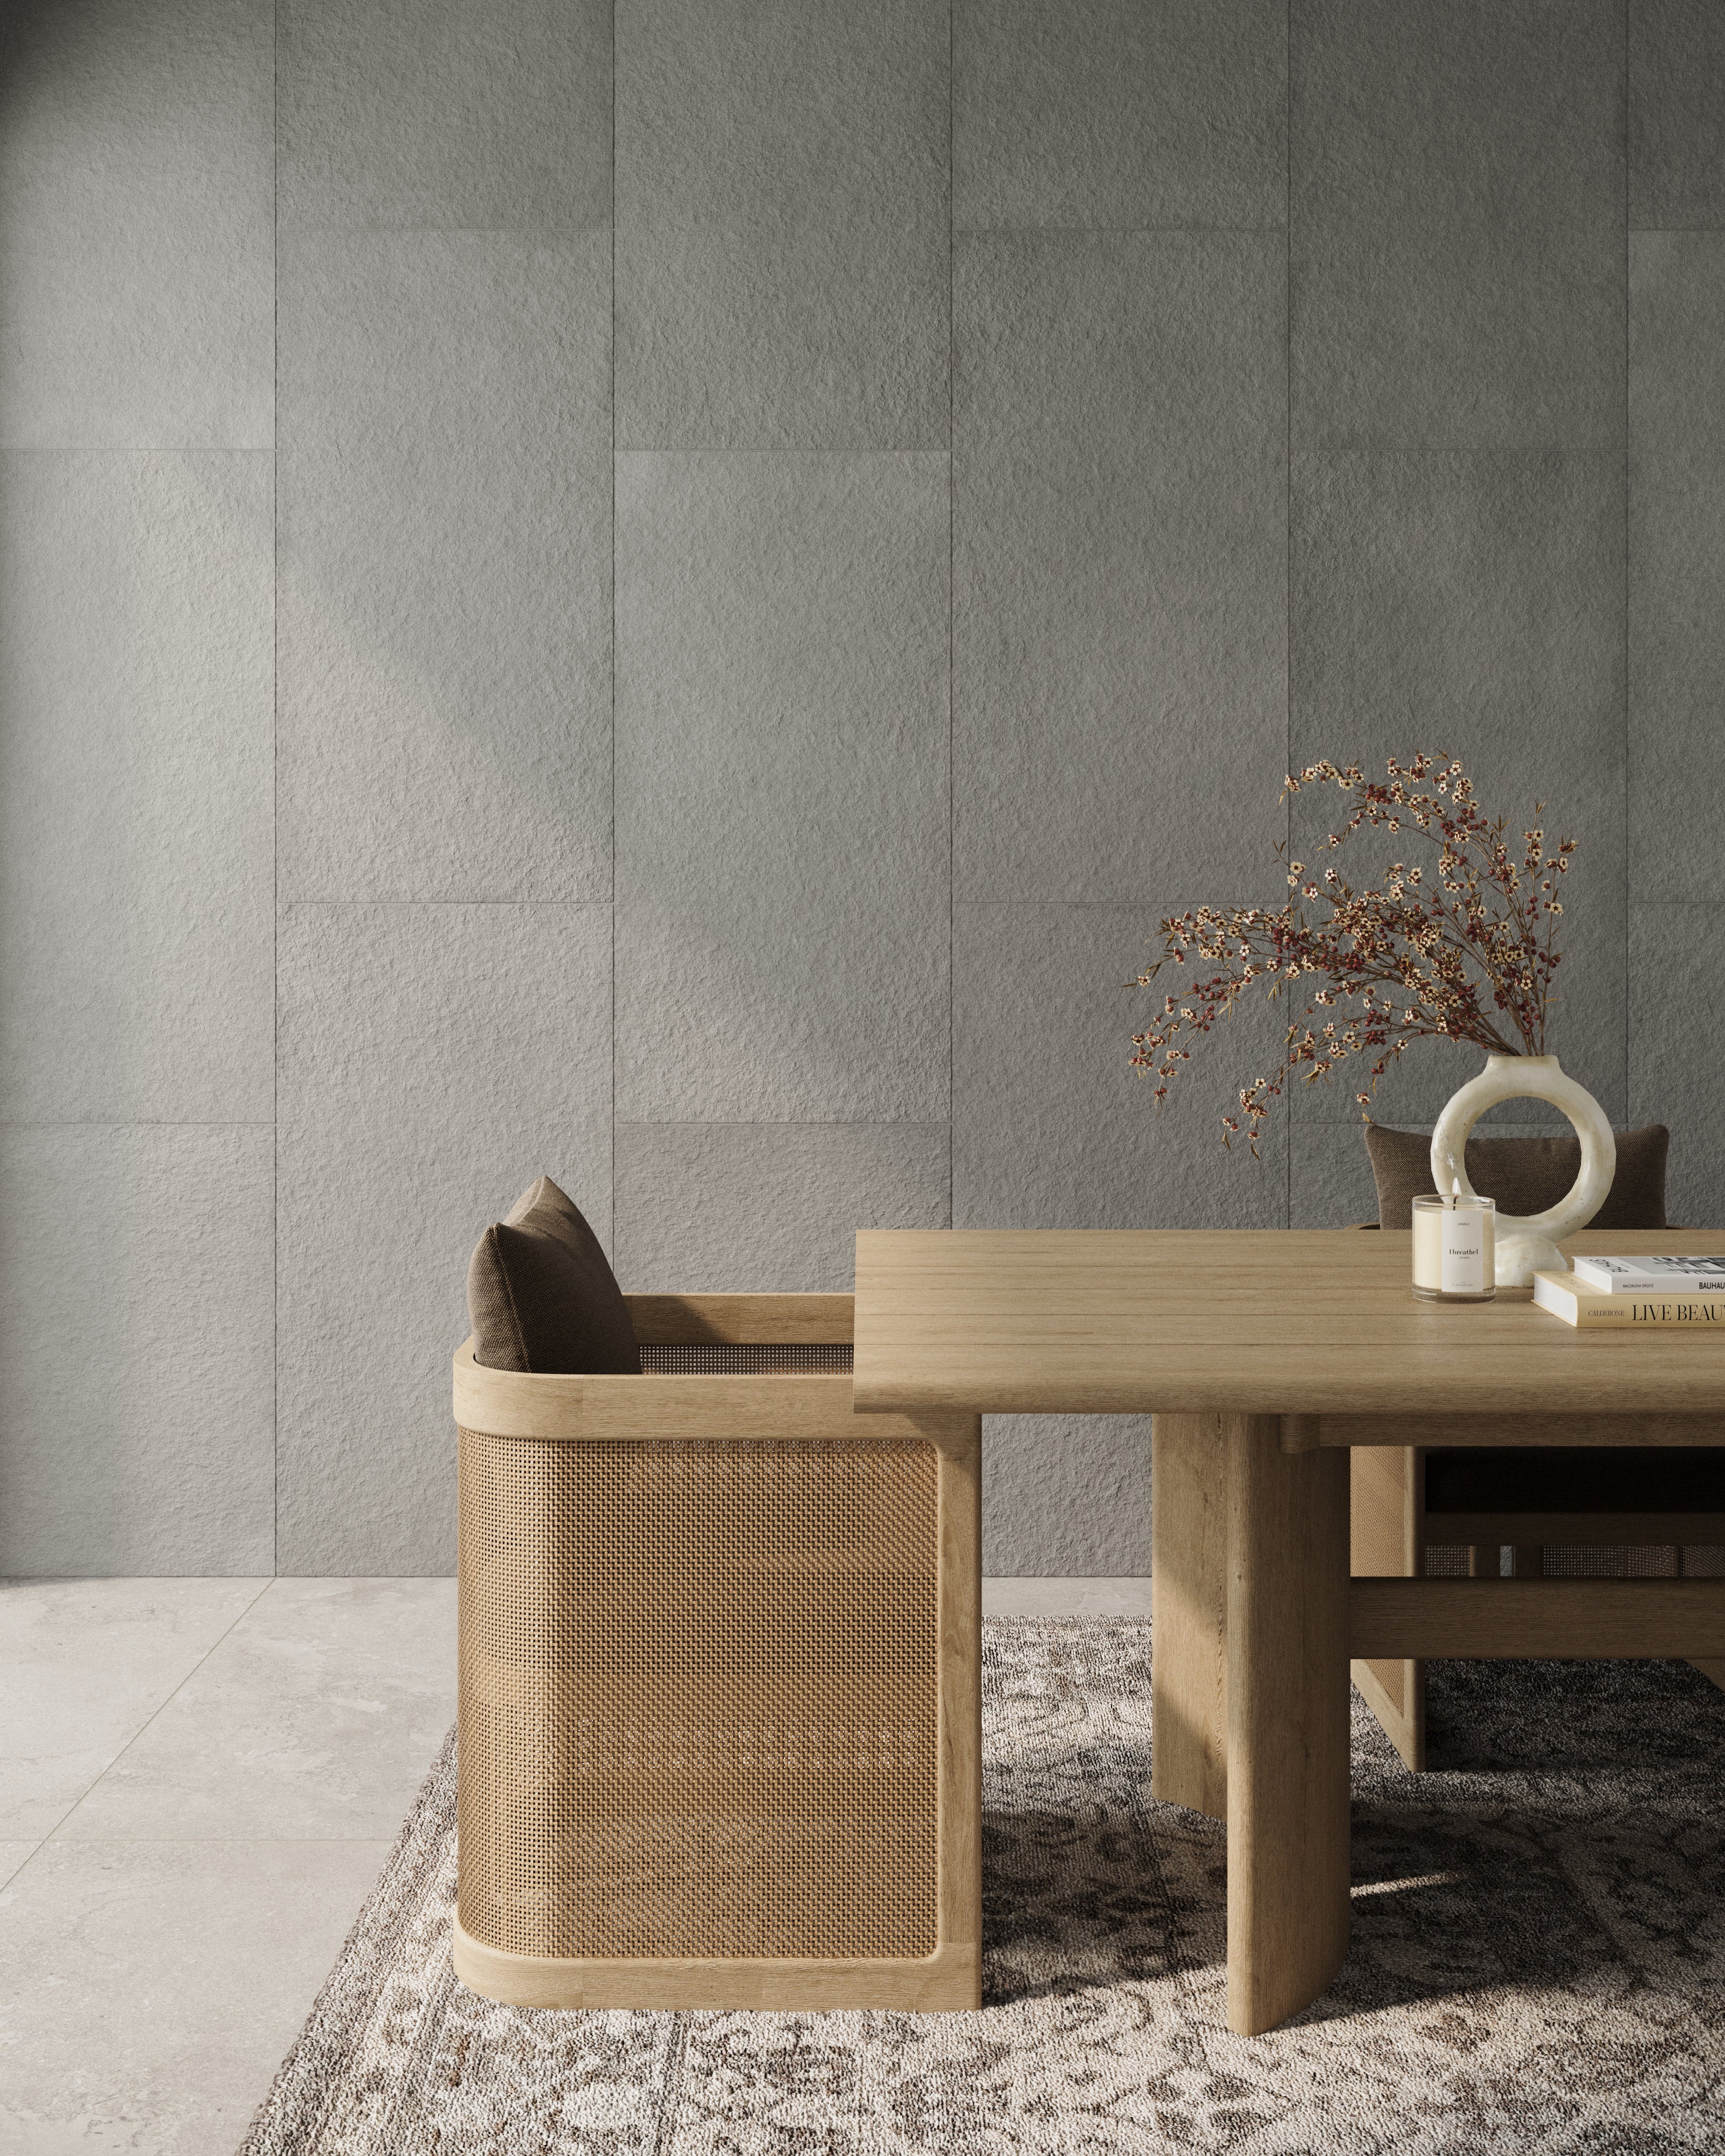 Palmer 24x48 Raw Porcelain Tile in Charcoal